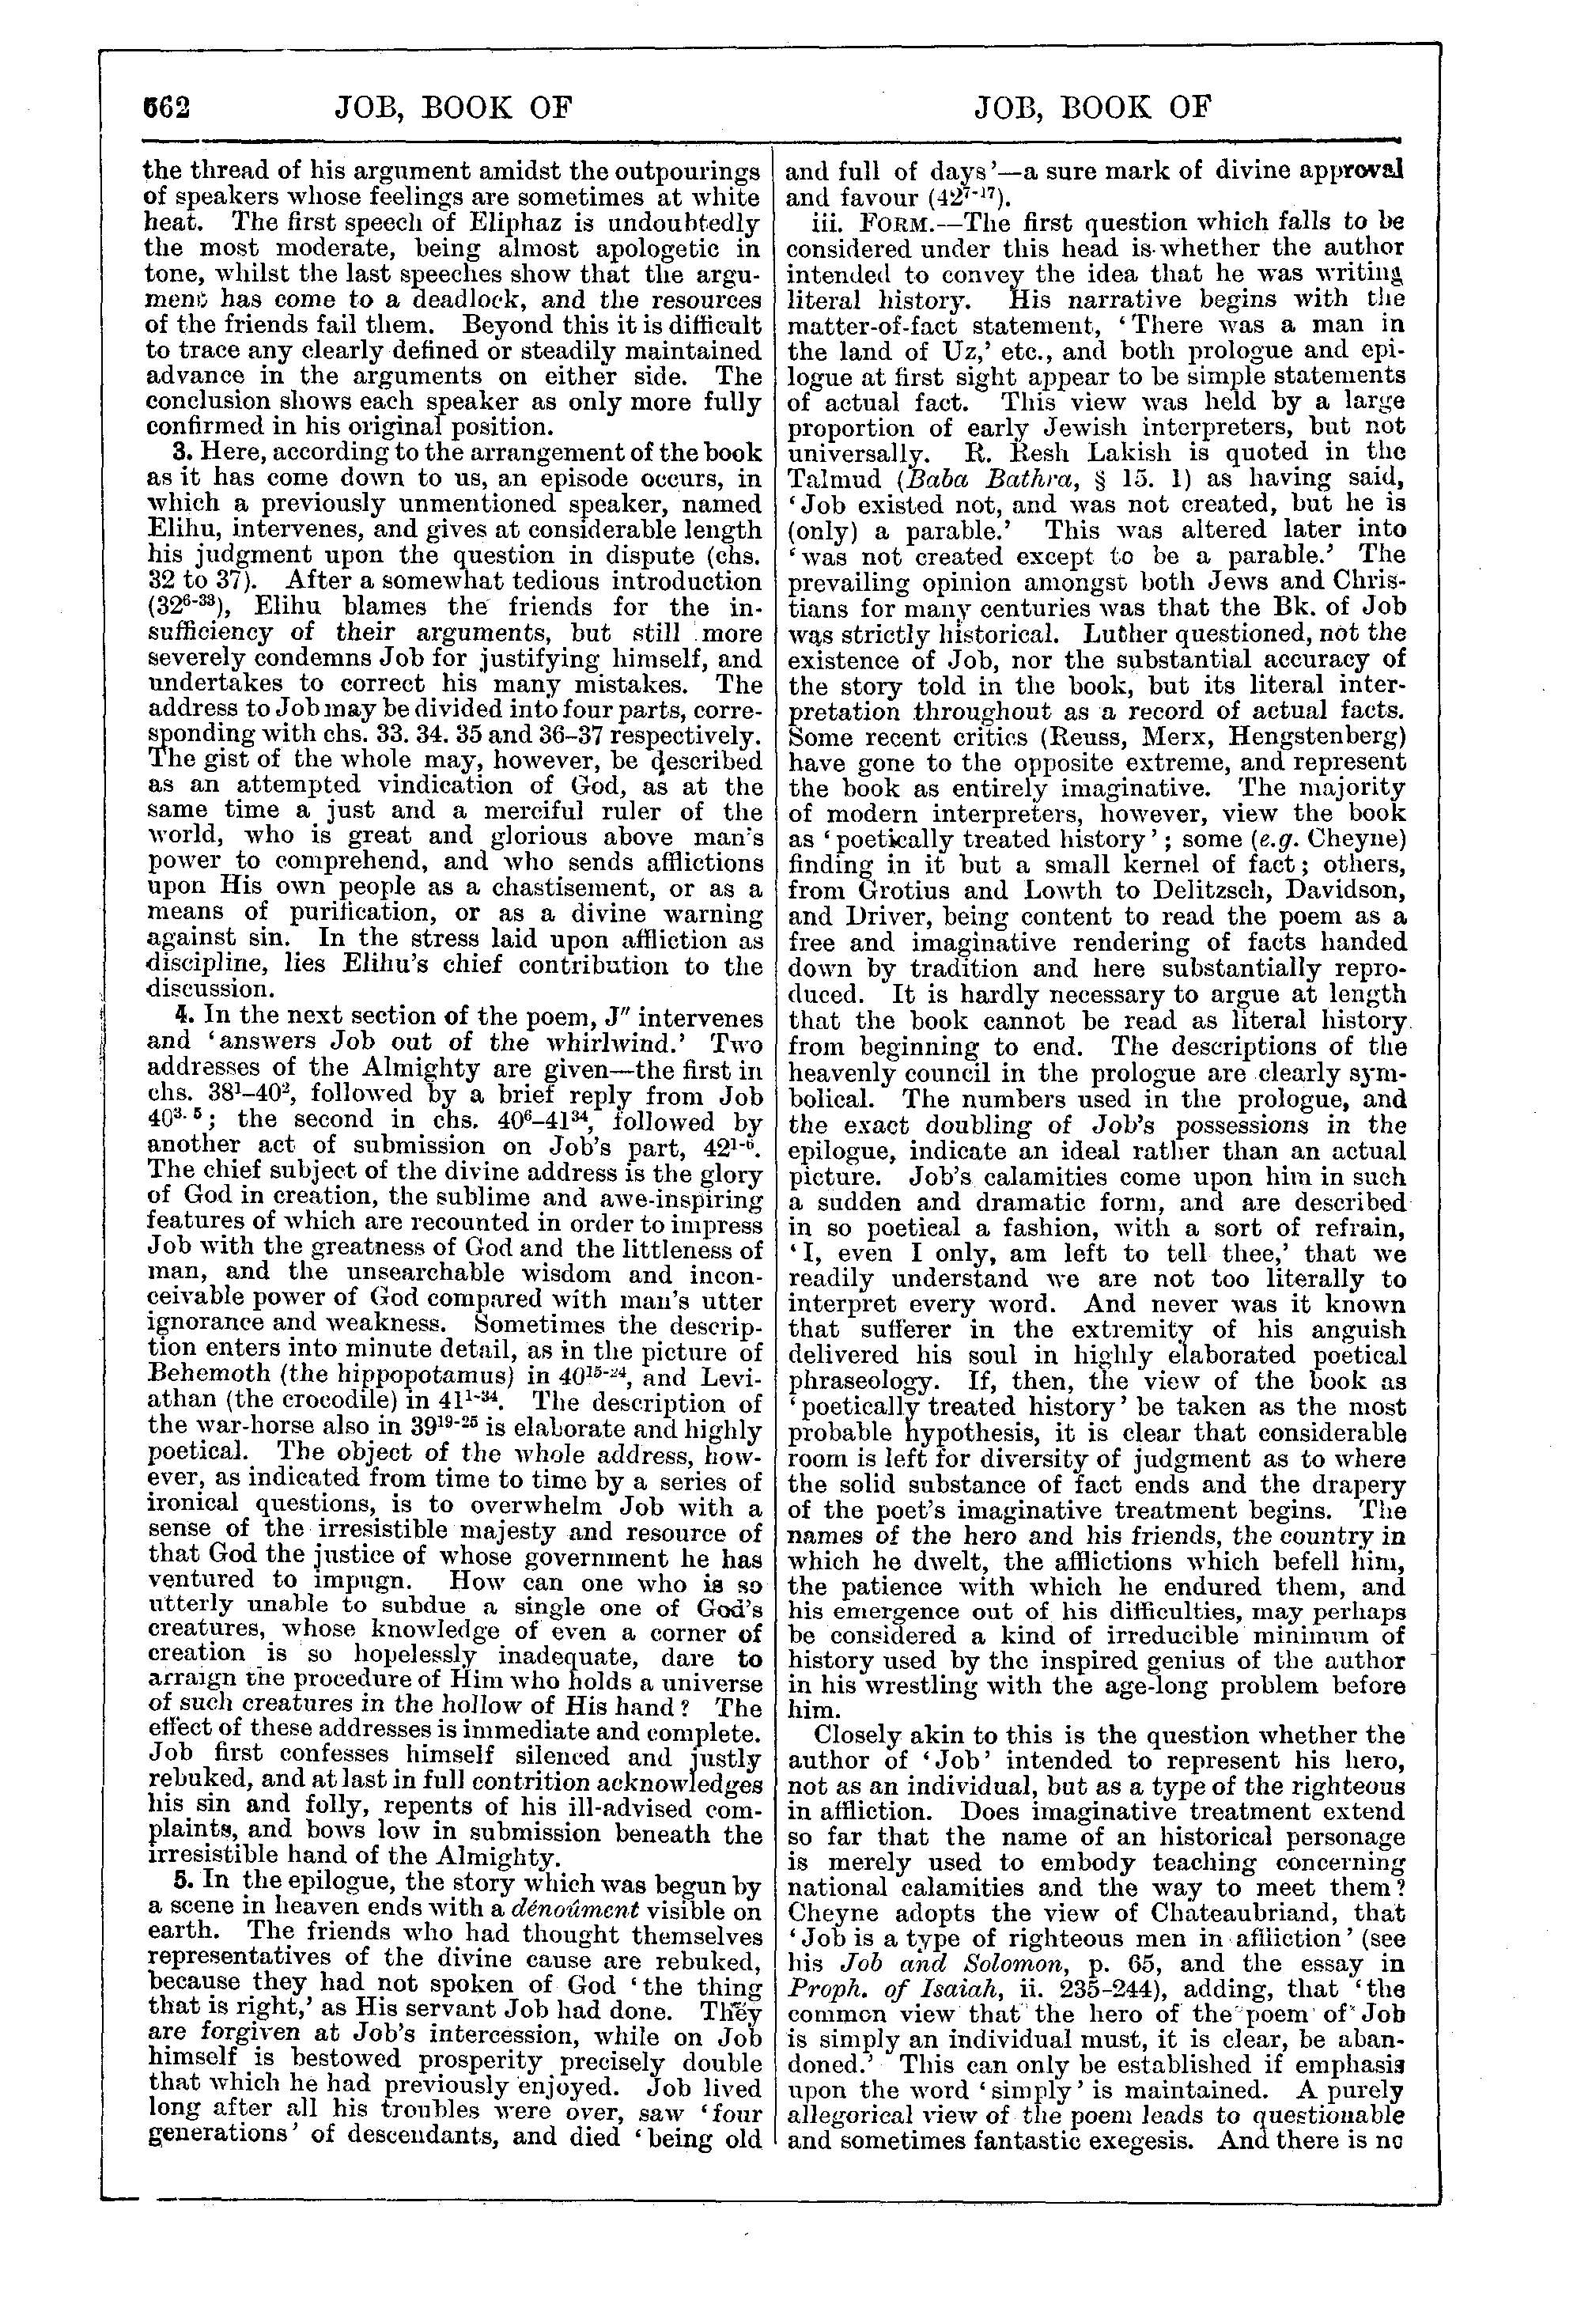 Image of page 662